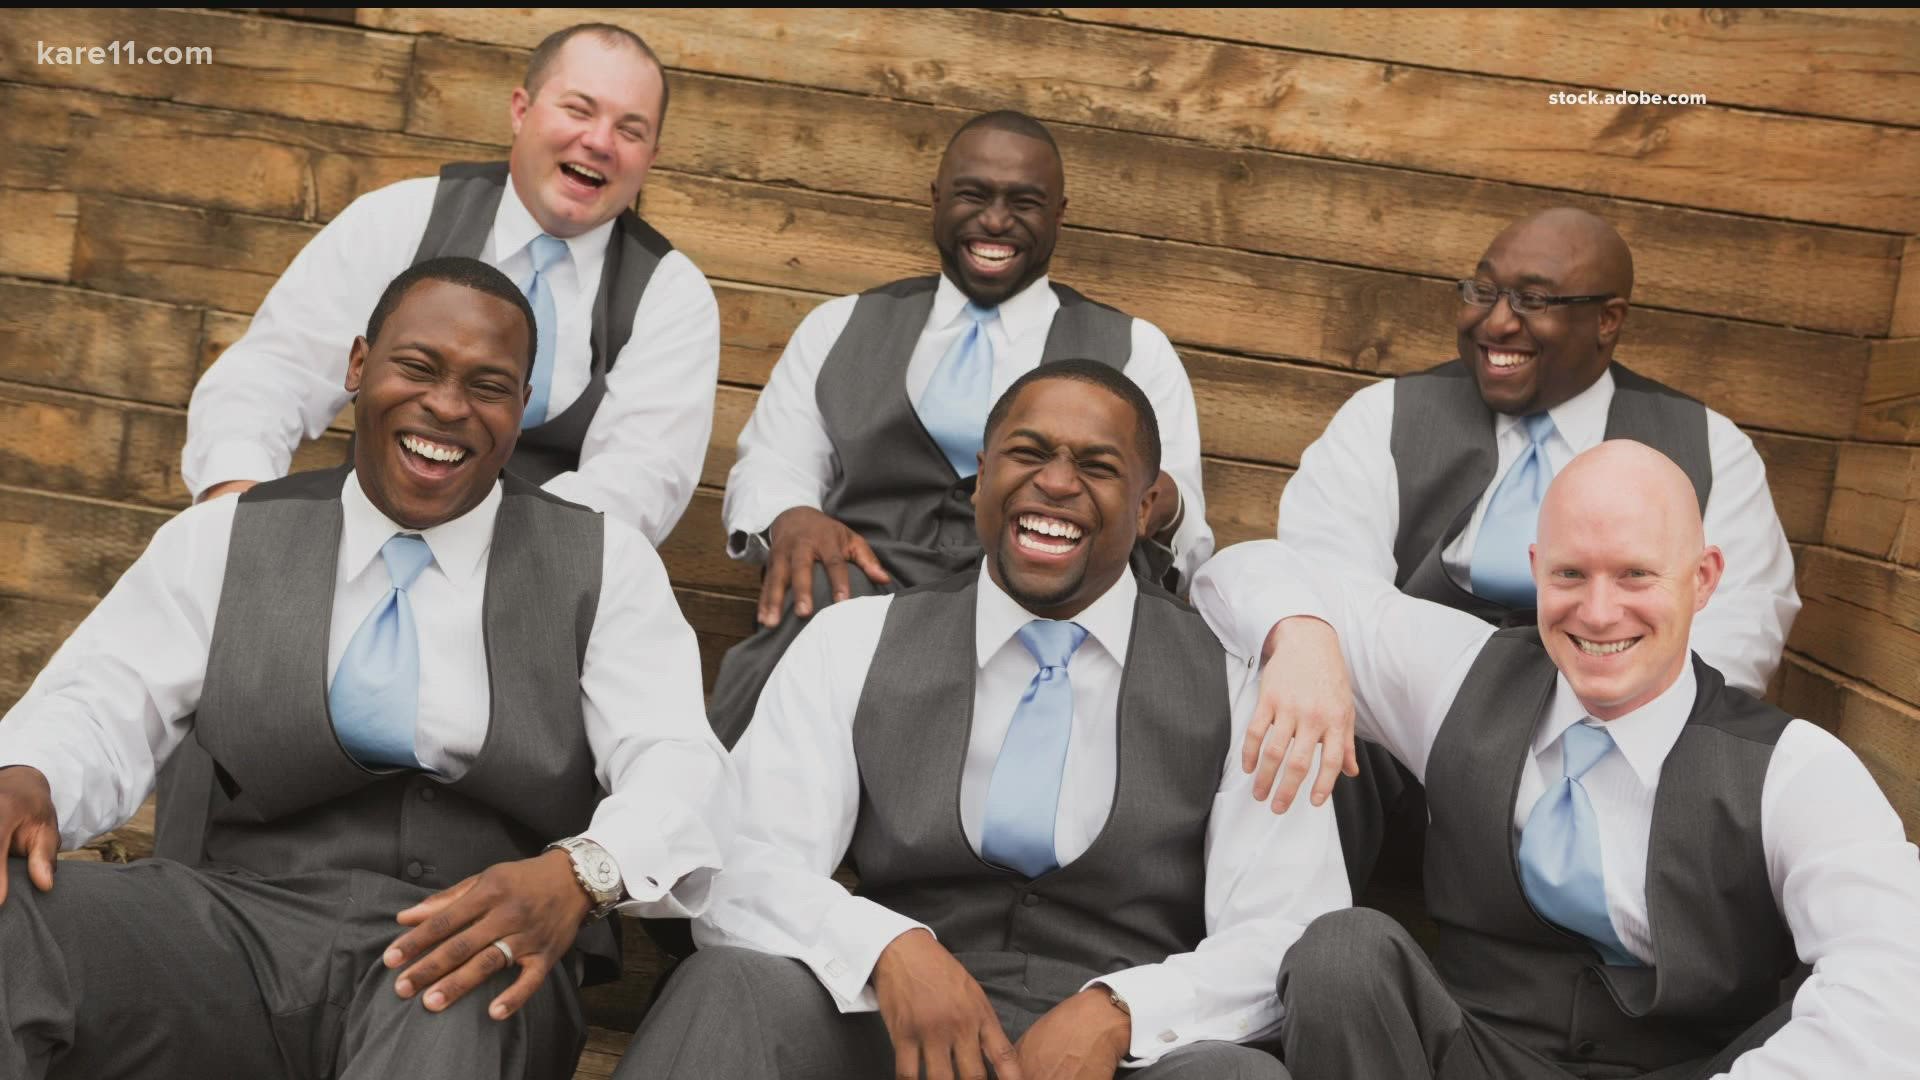 Guy Brown got some expert tips on how to help get your groomsmen wedding ready.